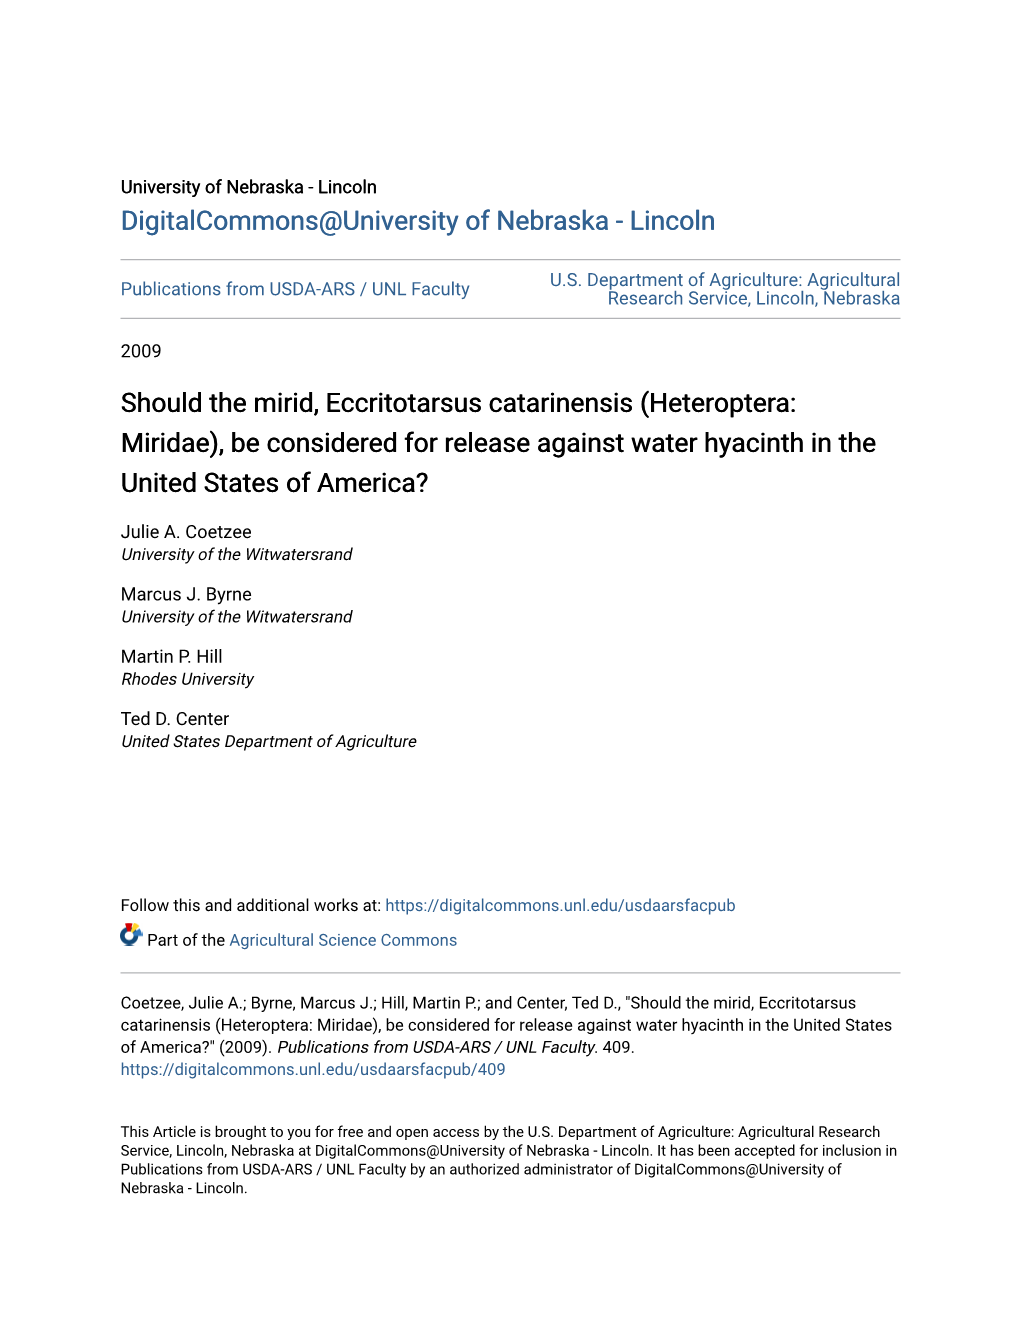 Should the Mirid, Eccritotarsus Catarinensis (Heteroptera: Miridae), Be Considered for Release Against Water Hyacinth in the United States of America?